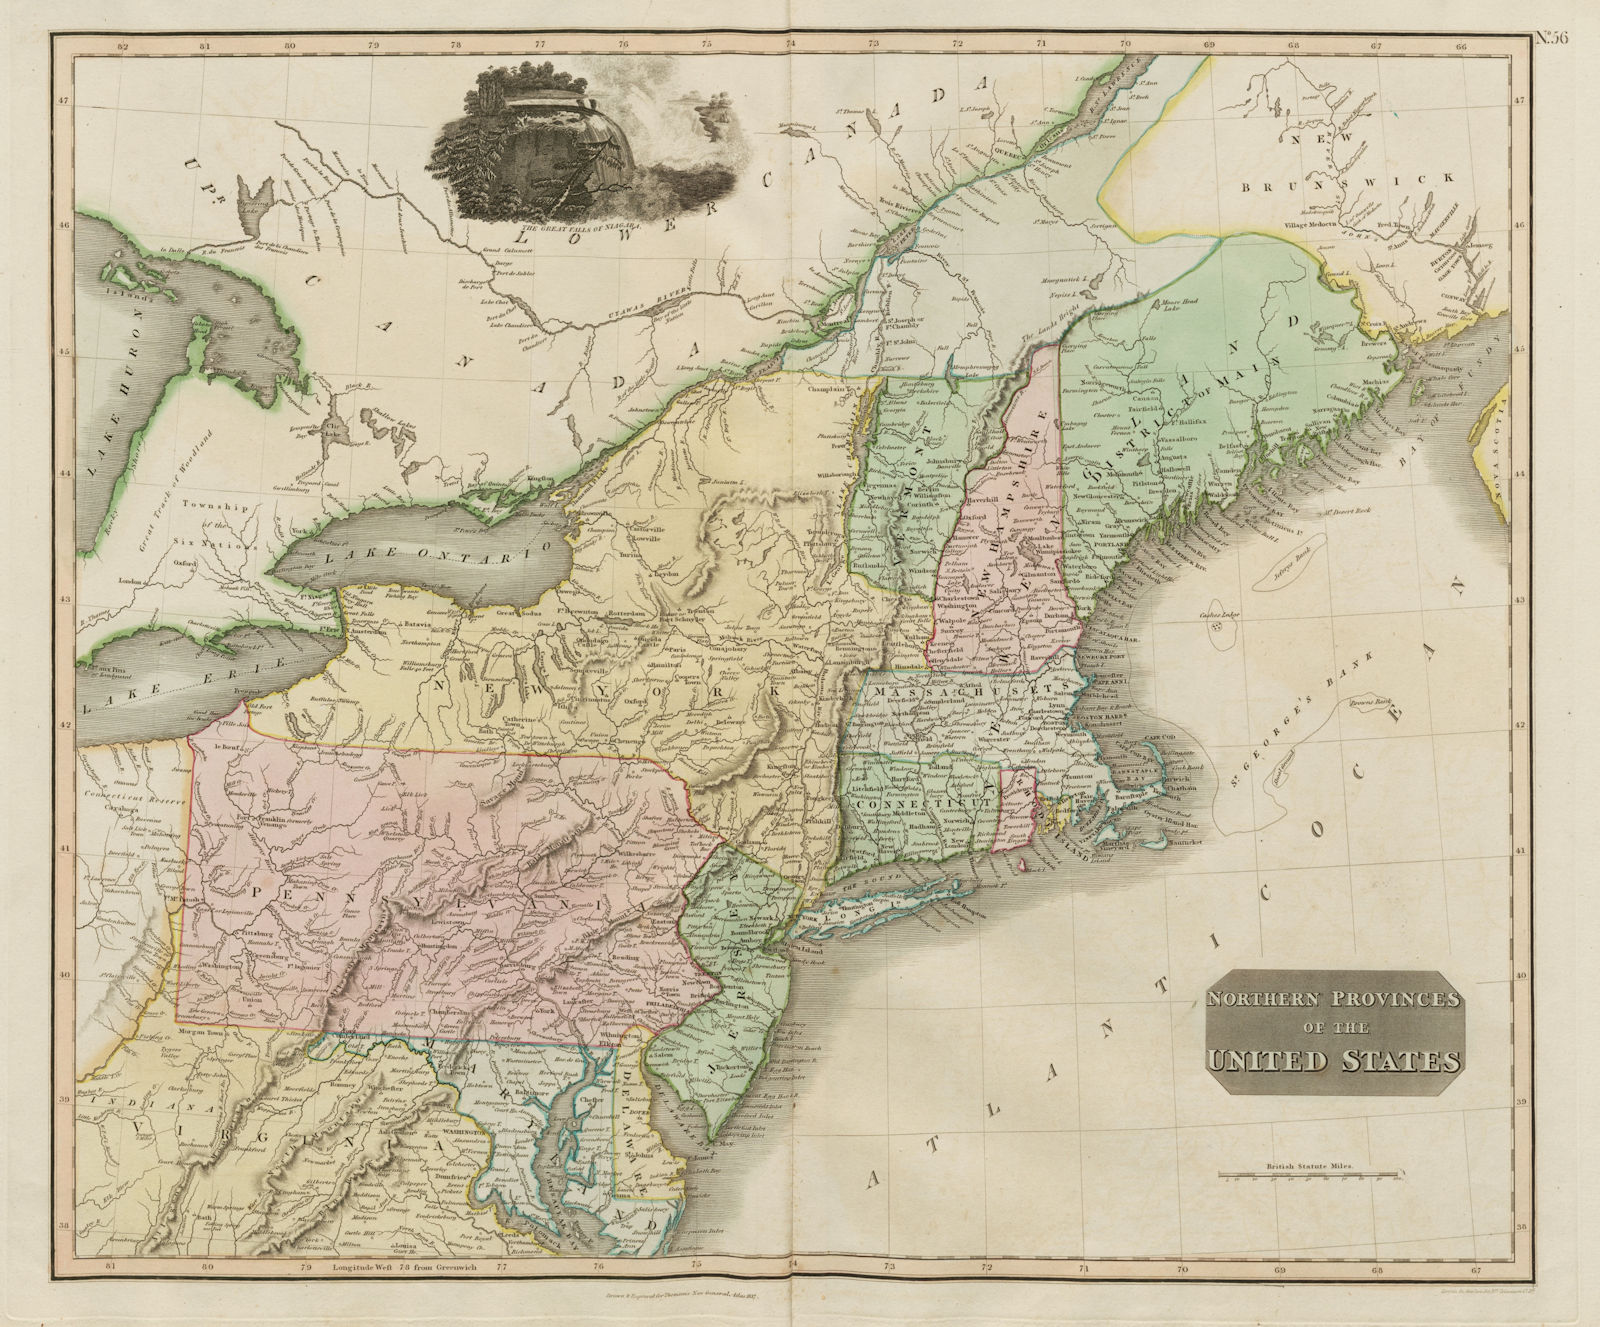 "Northern provinces of the United States". THOMSON. District of Main[e] 1817 map